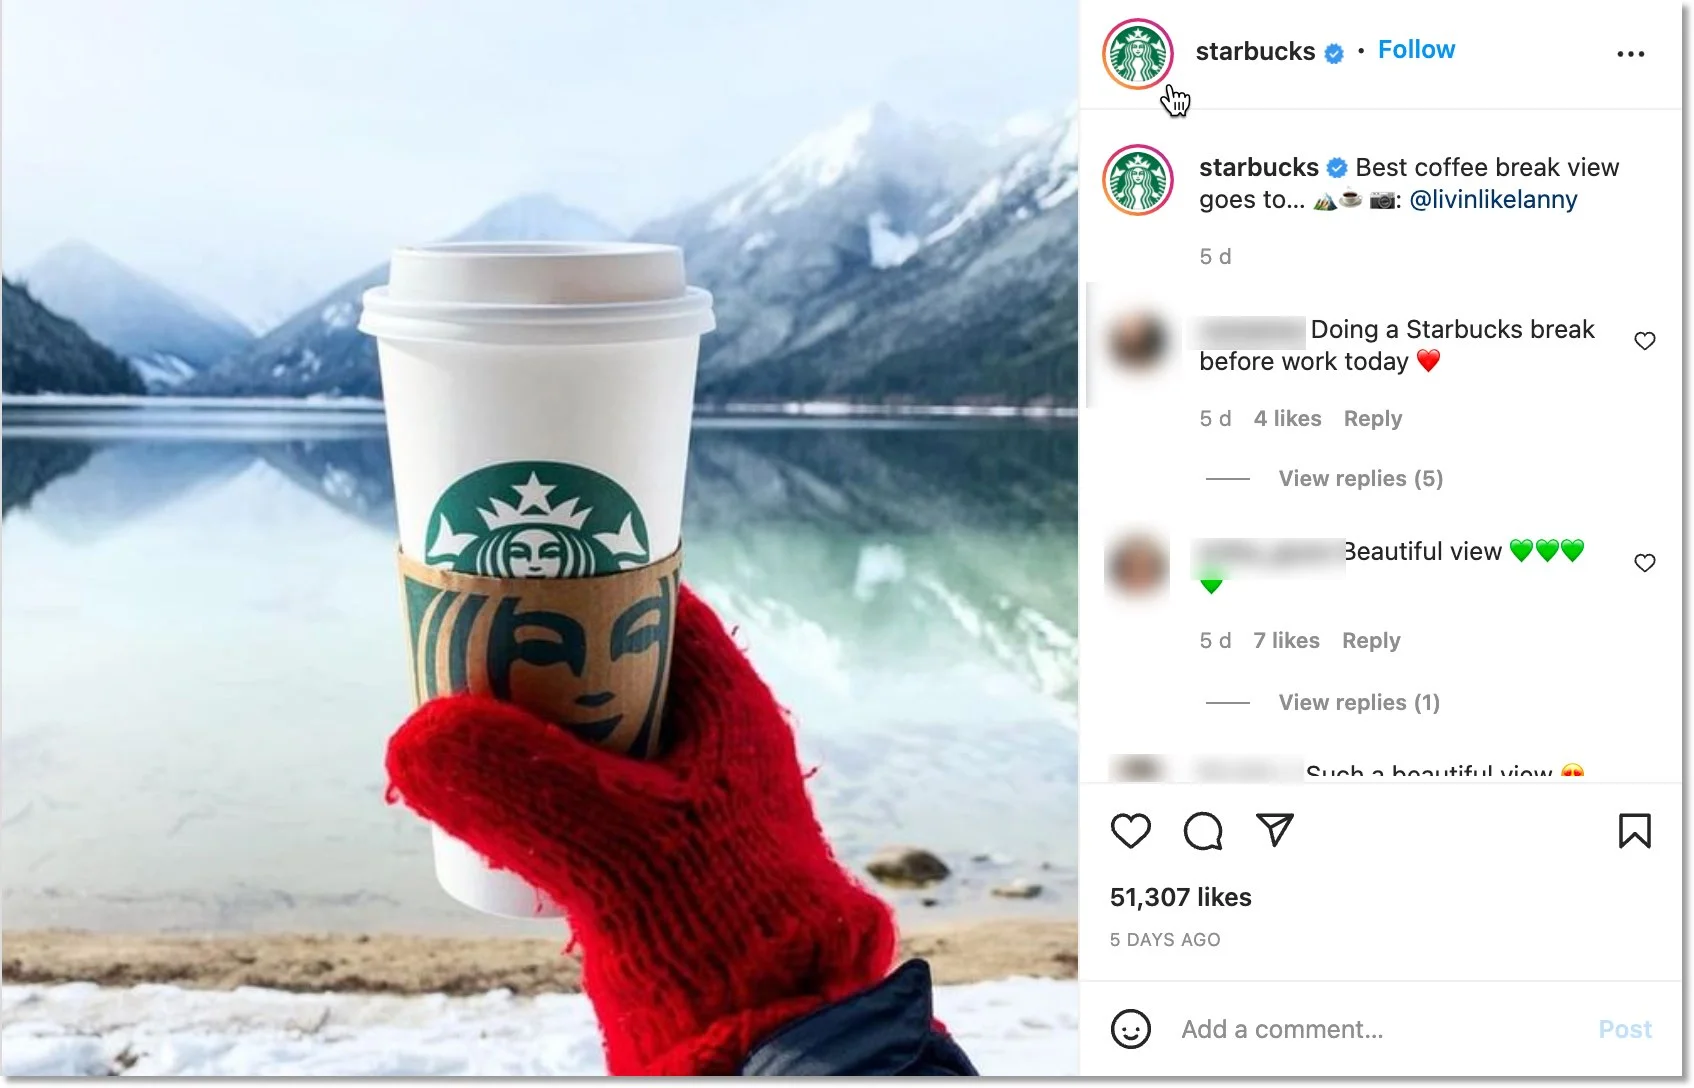 Example of user-generated content being reused by Starbucks